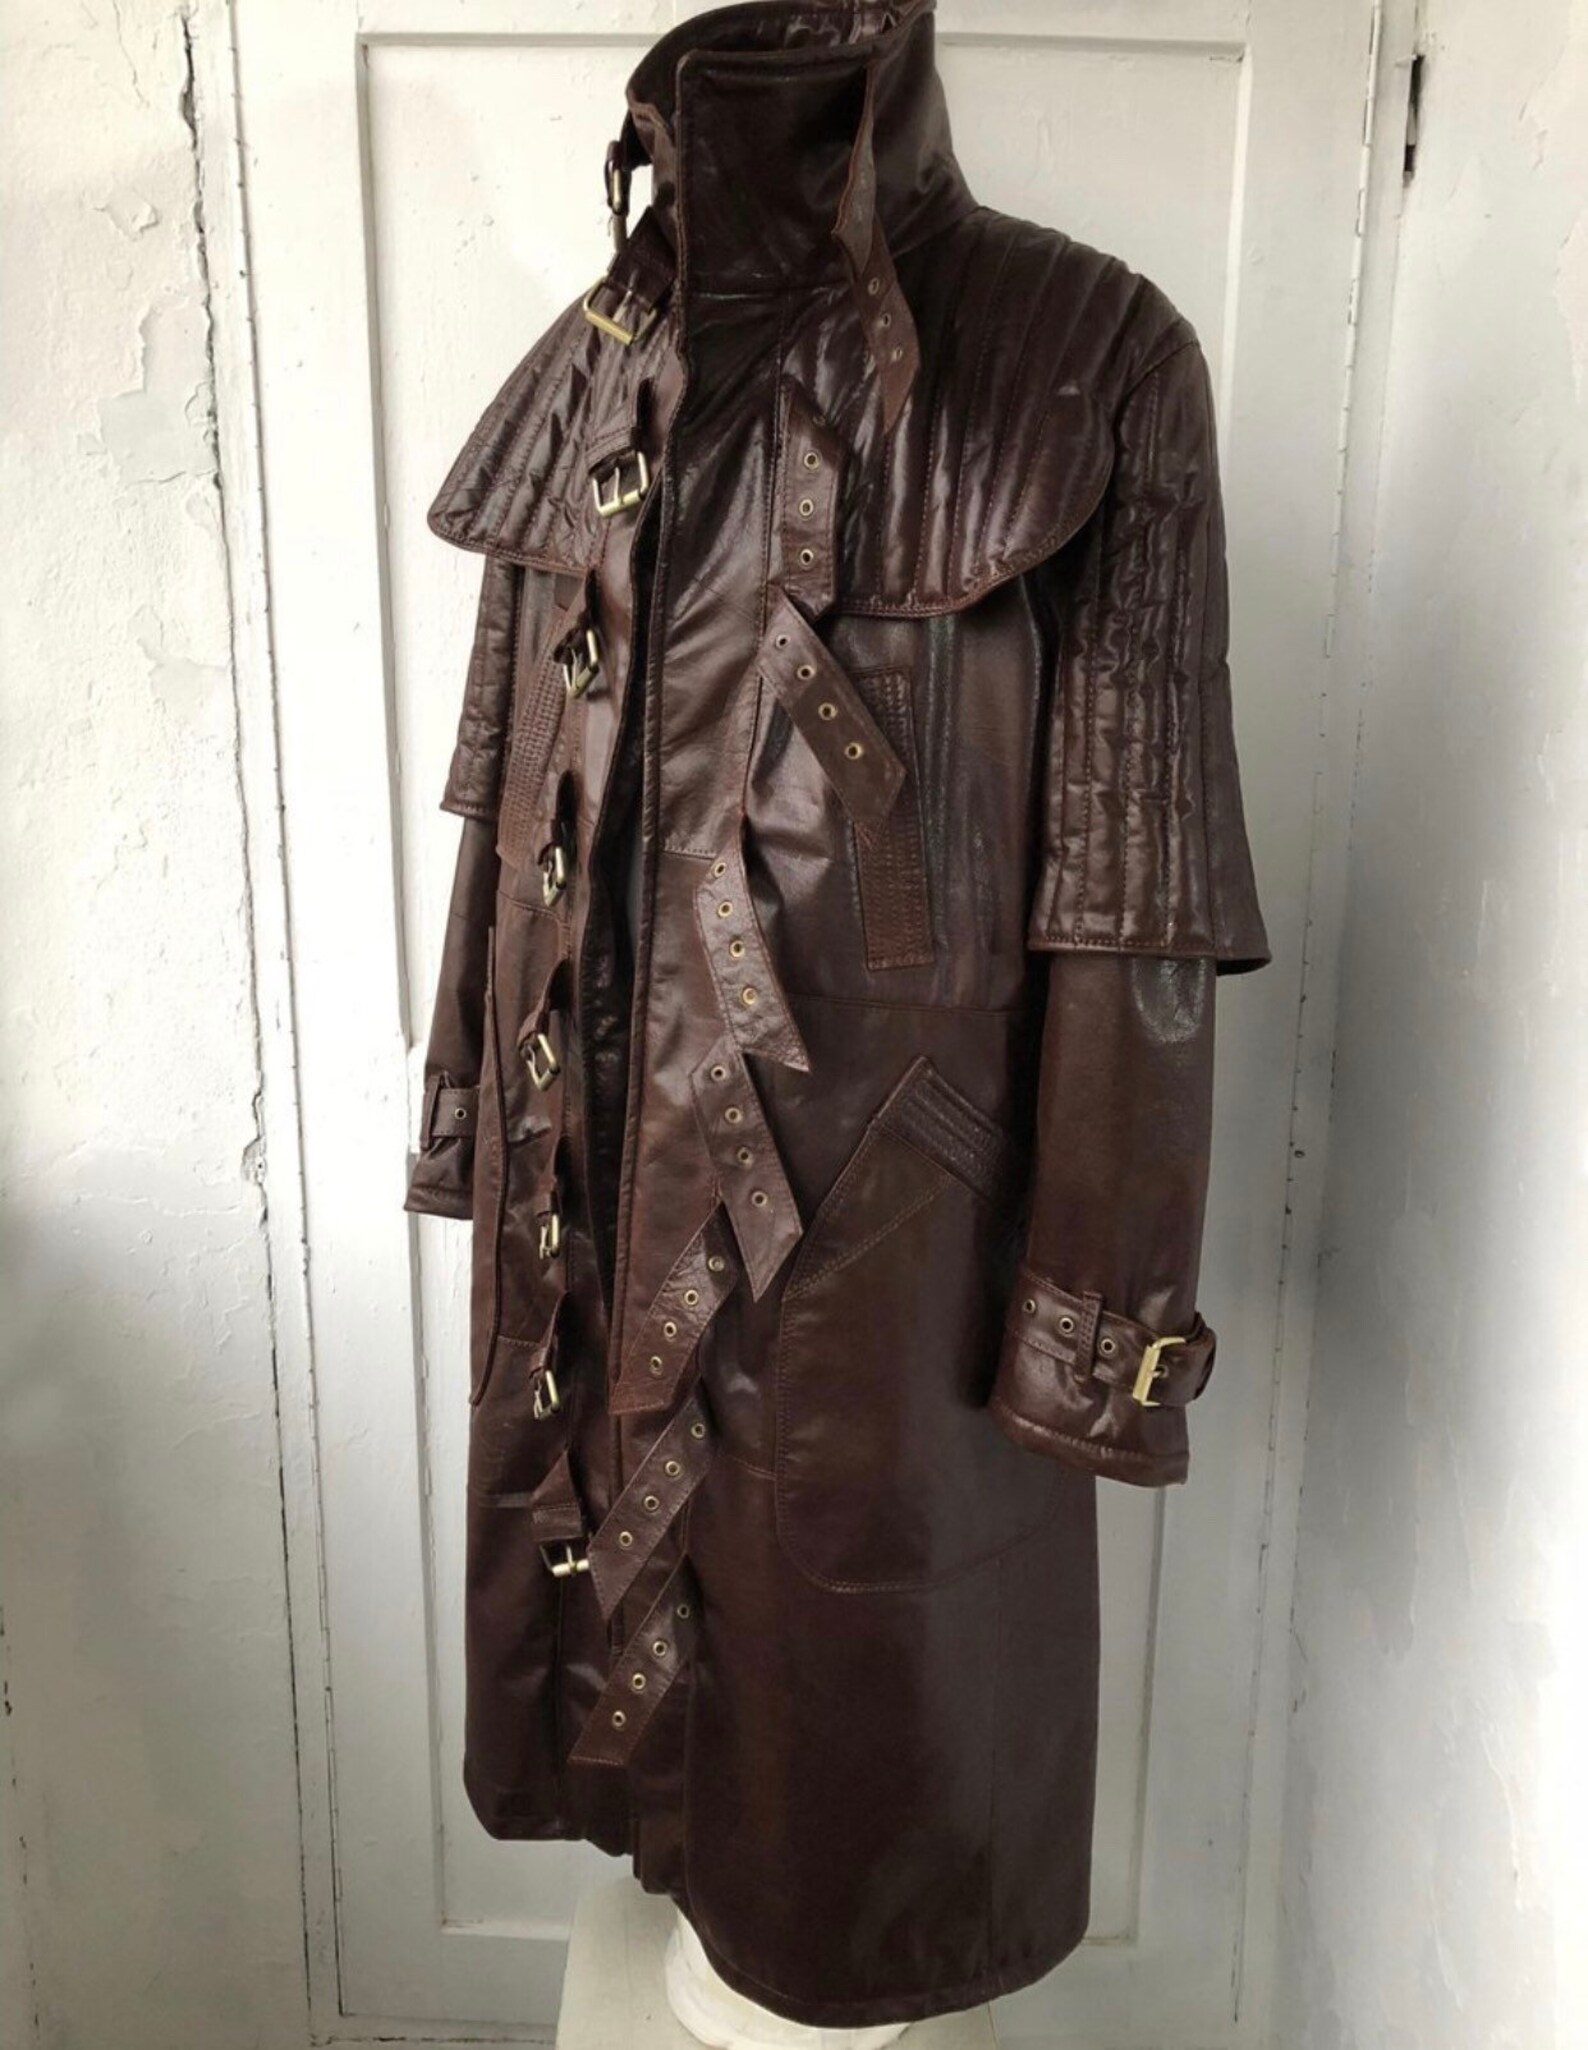 The Vanhelsing Raincoat From the Leather Photo is Buckled With - Etsy